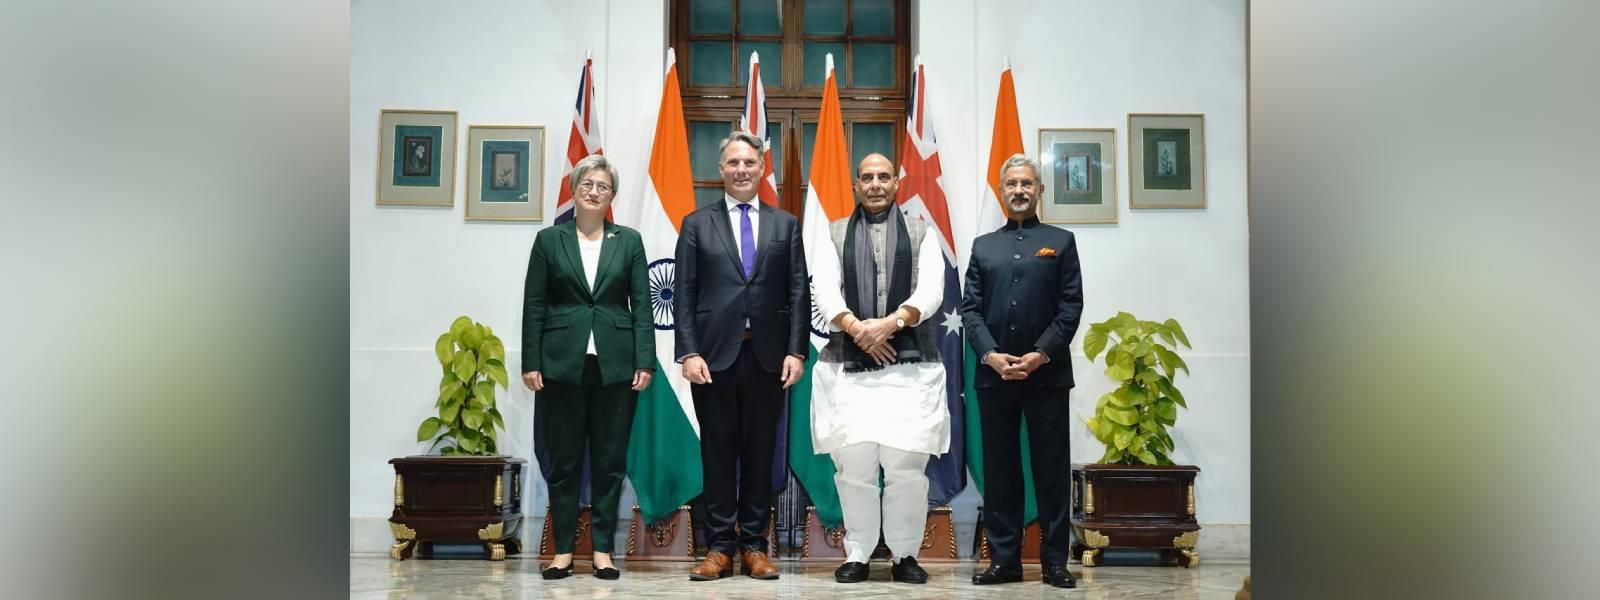 Defence Minister, Rajnath Singh and External Affairs Minister, Dr. S. Jaishankar received H.E. Mr. Richard Marles, Deputy Prime Minister &amp; Defence Minister and H.E. Ms. Penny Wong, Foreign Minister of Australia ahead of the 2nd India-Australia 2+2 Ministerial Dialogue